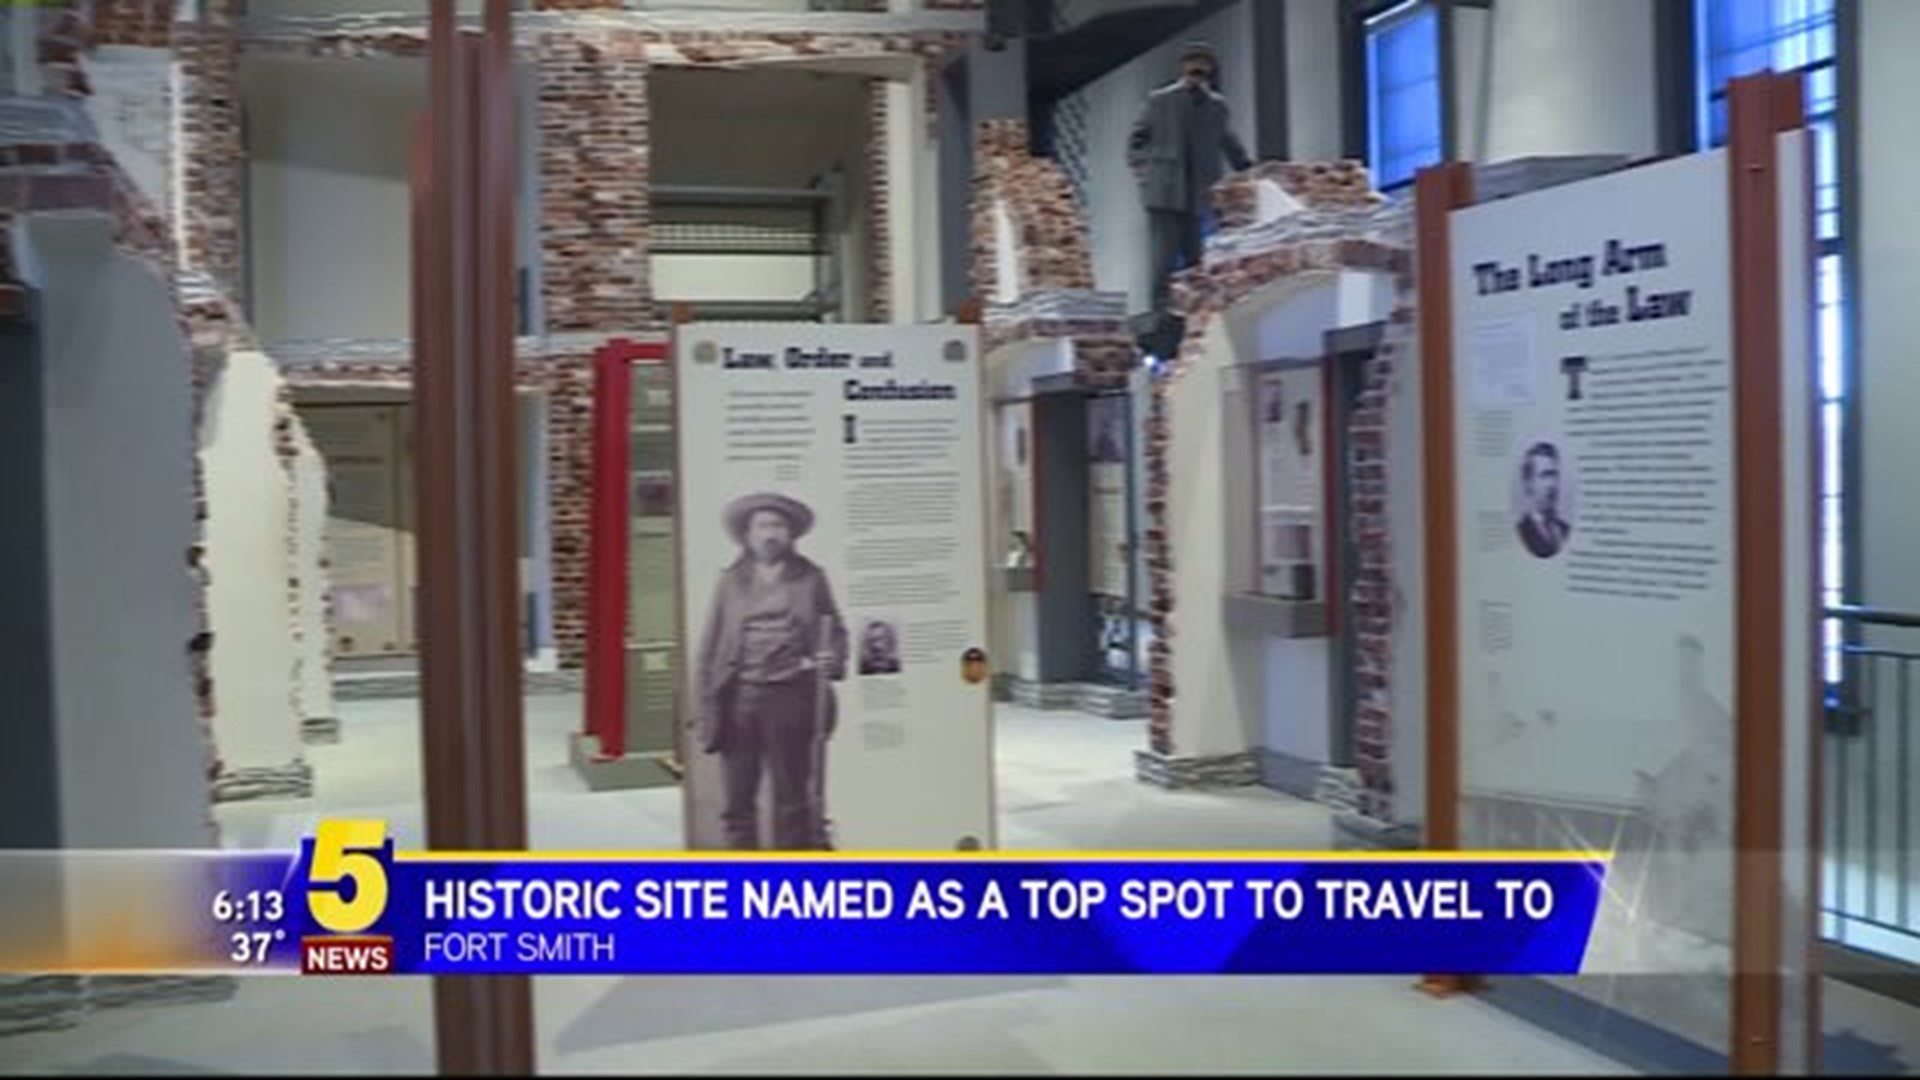 HISTORIC SITE MAKES LIST OF TOP PLACES TO VISIT